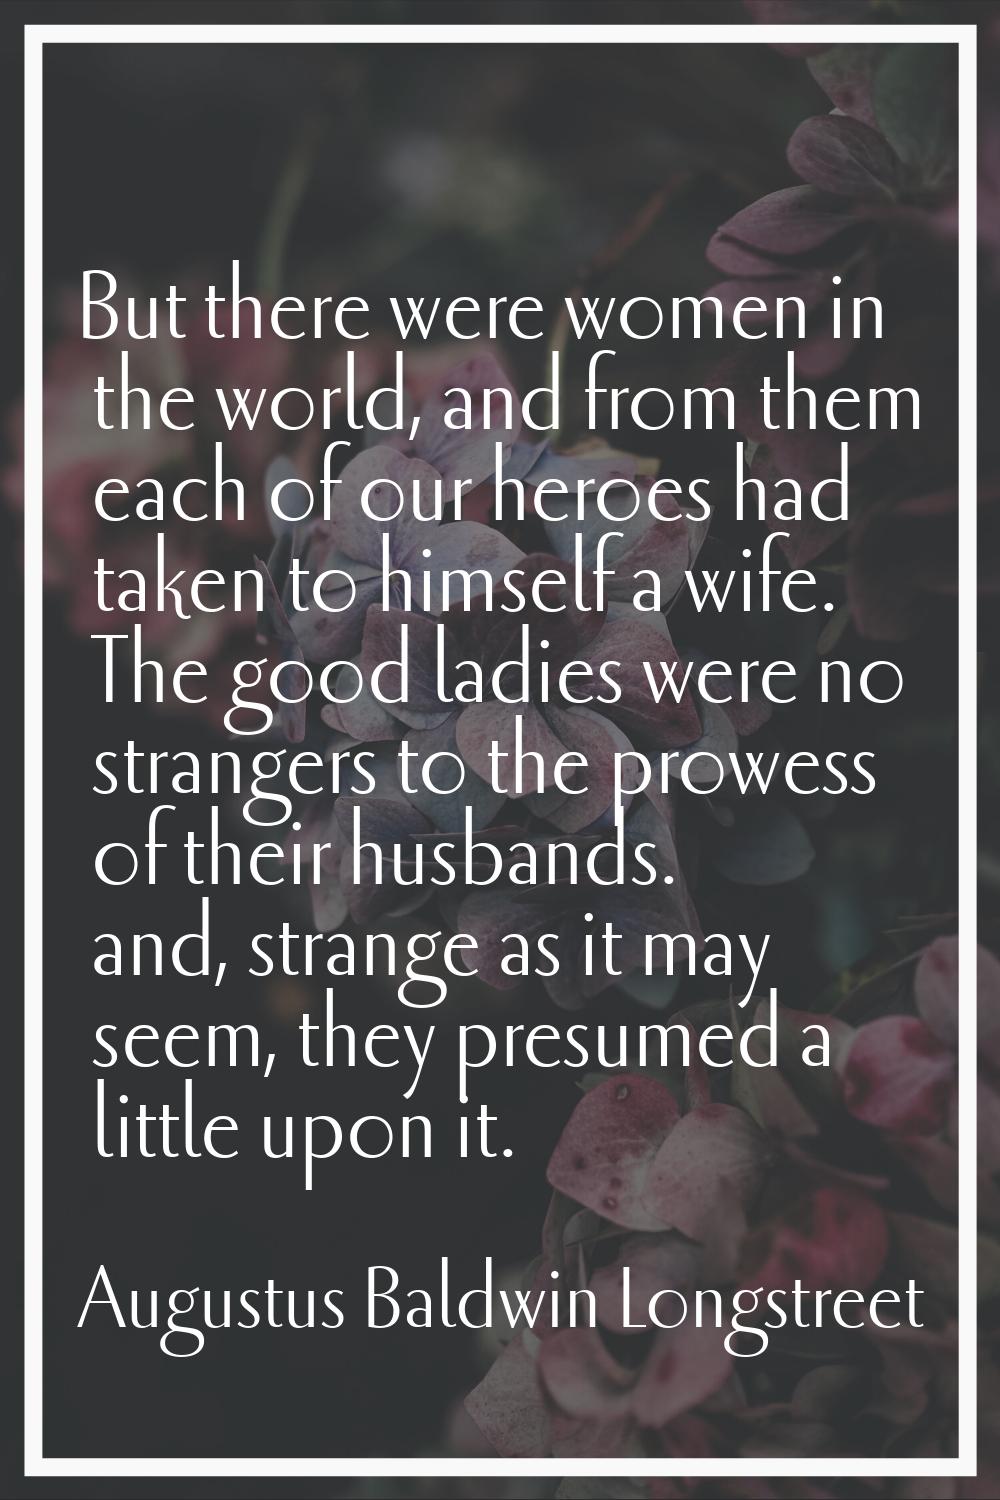 But there were women in the world, and from them each of our heroes had taken to himself a wife. Th